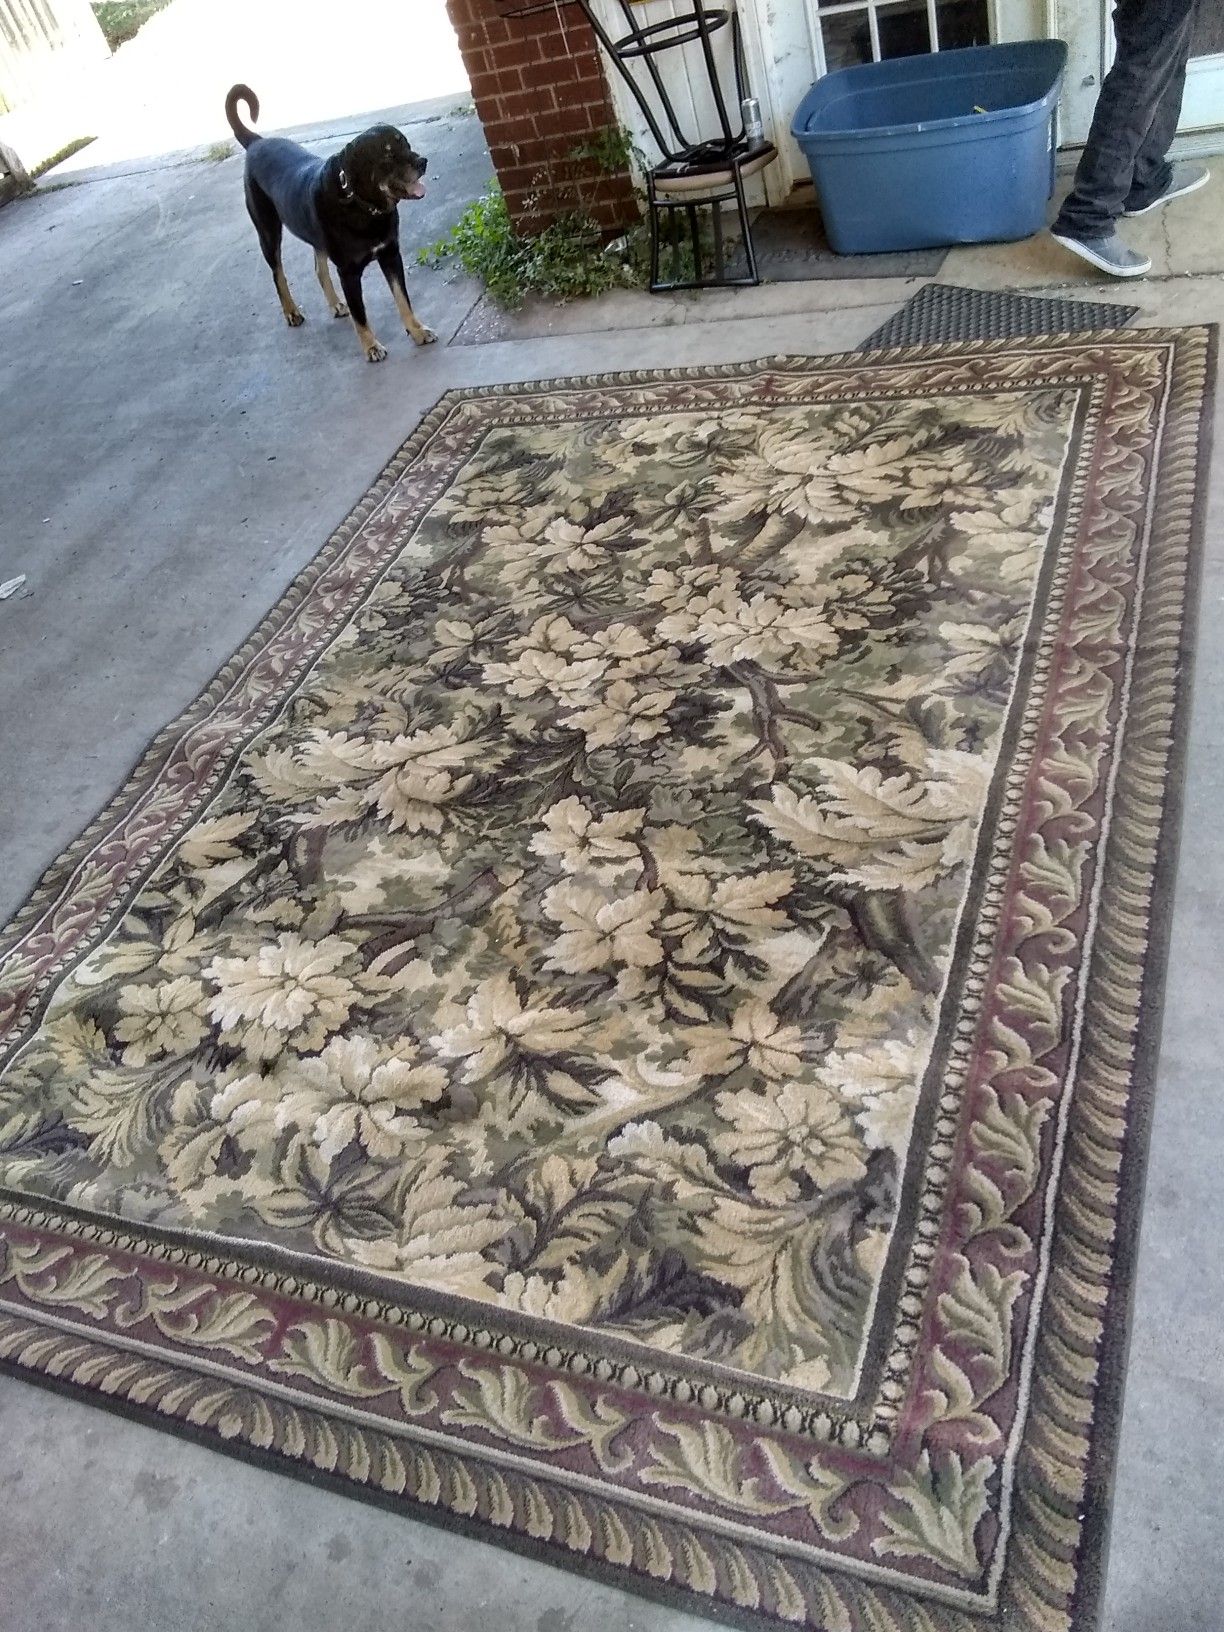 Very big antique rug I think it is 10' × 8.5' will varify if needed. No stains or odor, I just have no use for it